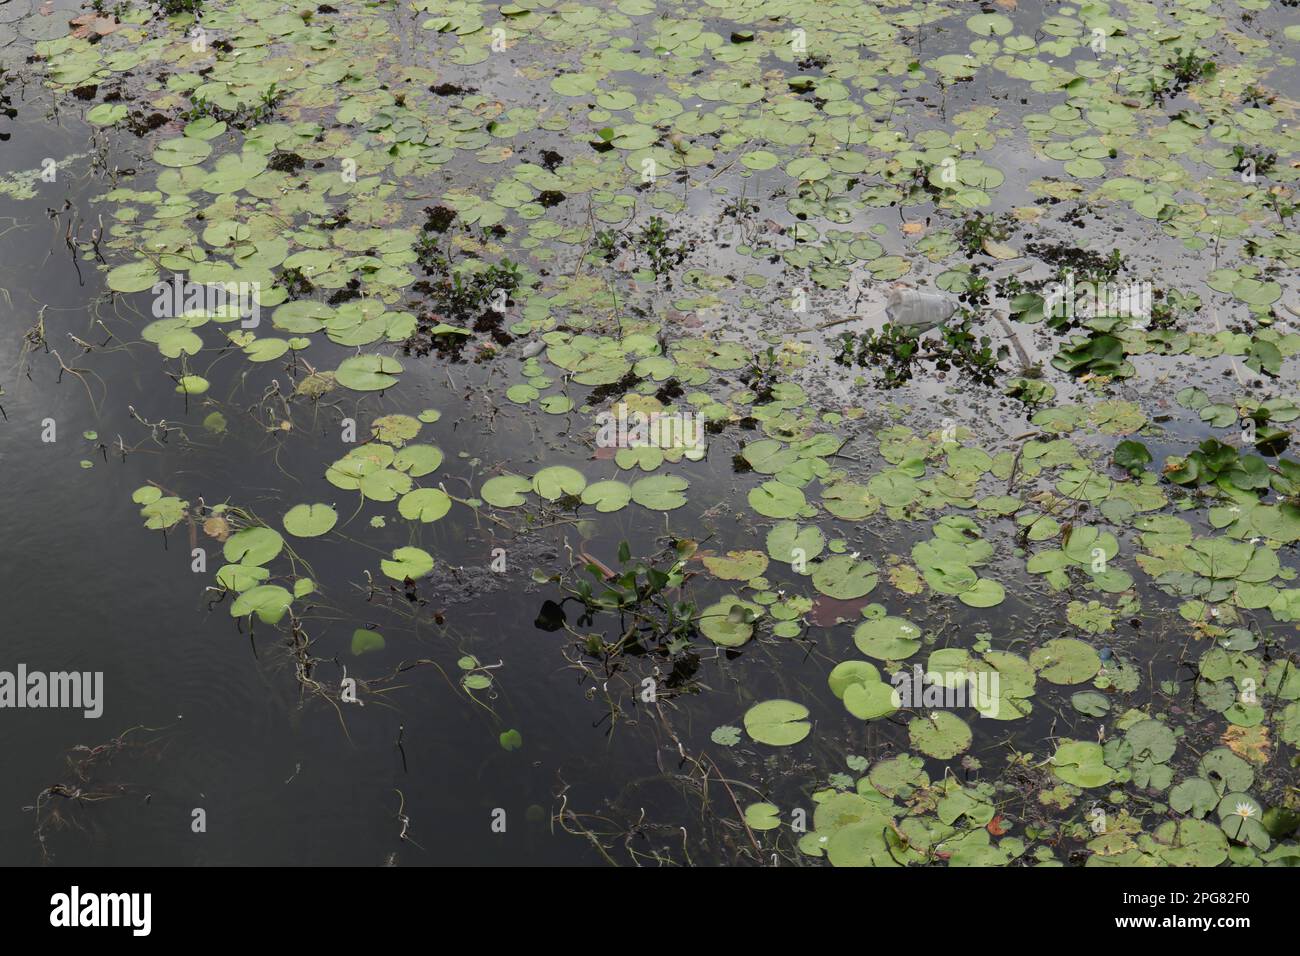 High angle view of a river surface filled with water lilies and common water hyacinth, Salvinia and several garbage debris Stock Photo